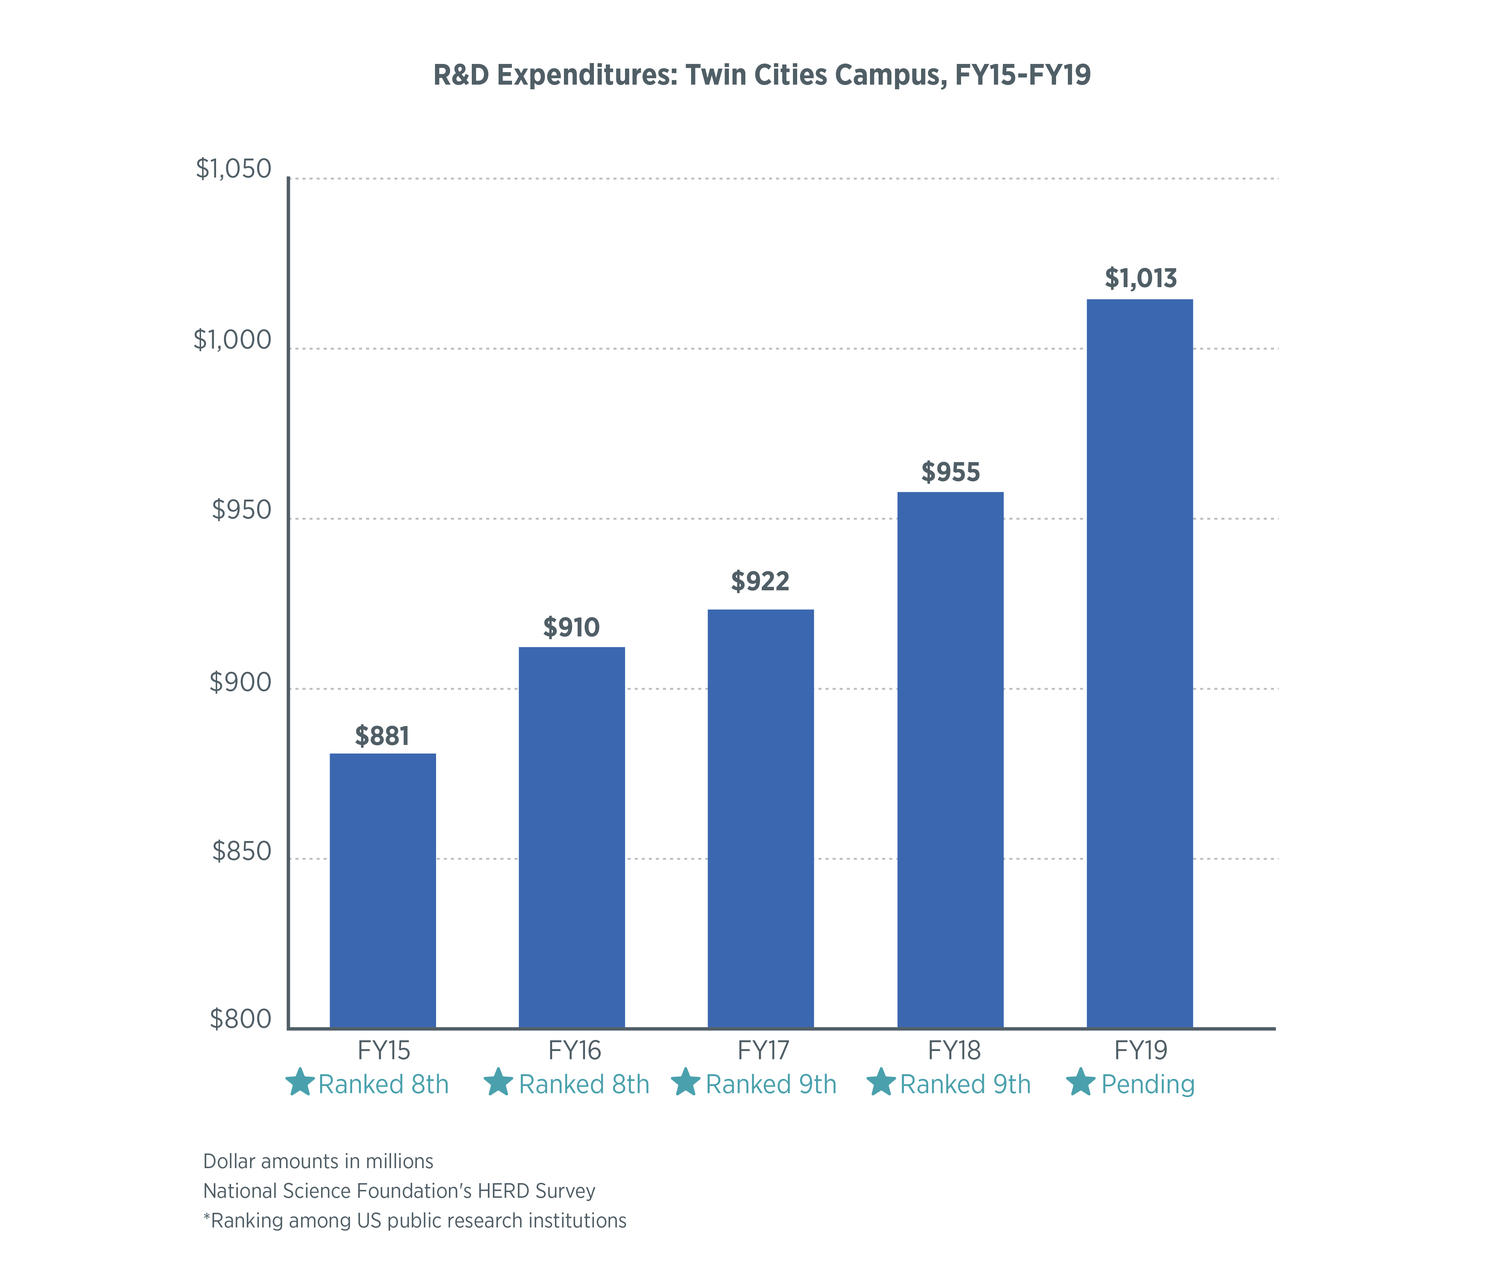 R&D Expenditures (Twin Cities Campus, FY15-FY19) chart depicting an increase in funding and ranking every year. Email ovprcomm@umn.edu for this information in an alternative format.